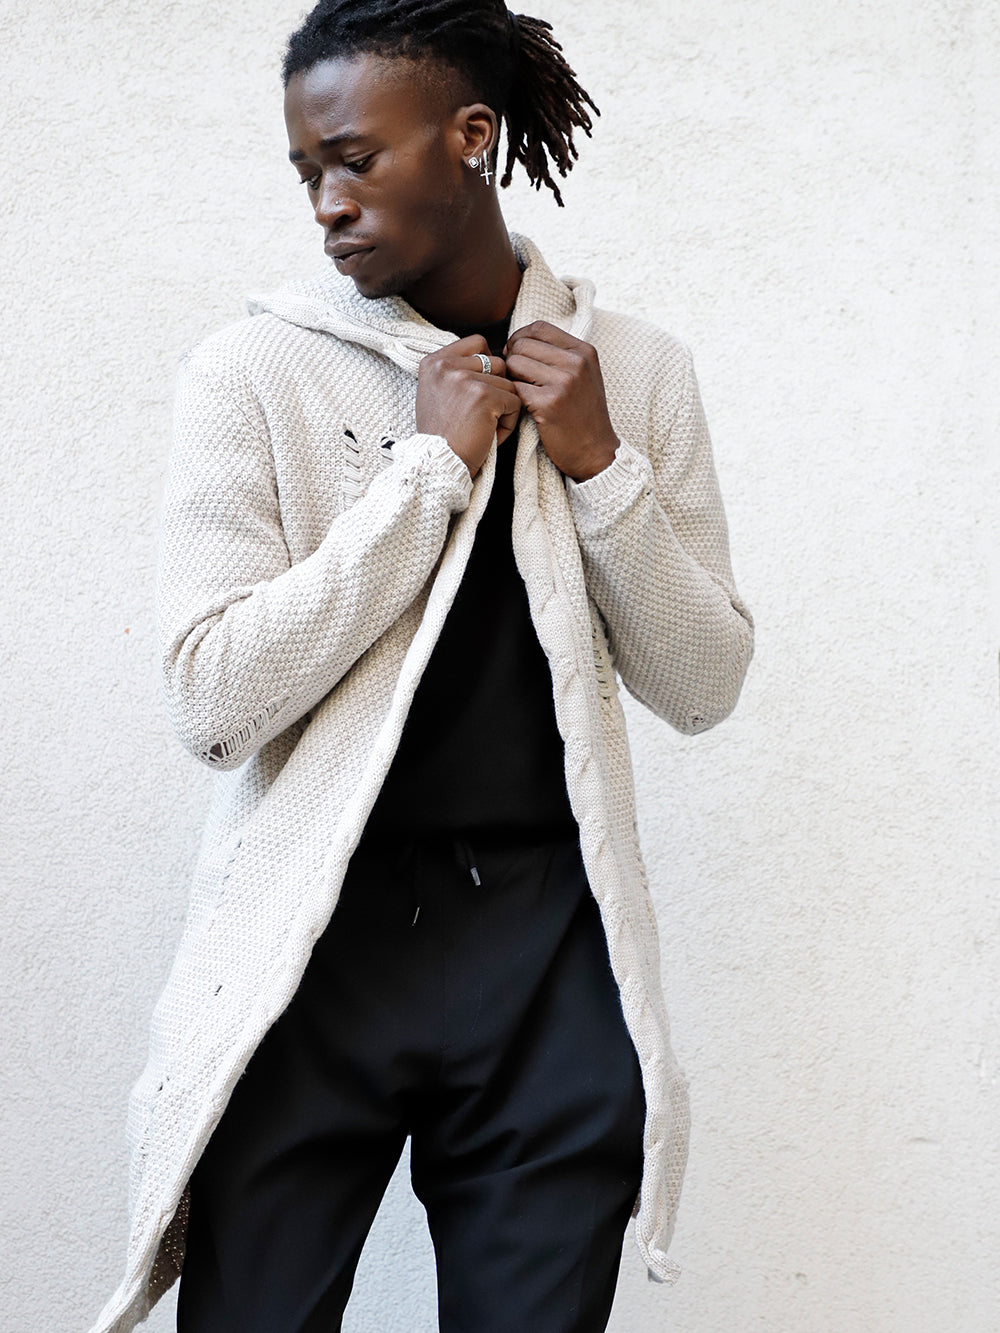 A man in hooded distressed cardigan // stone skinny fit jeans and a white jacket leaning against a wall.